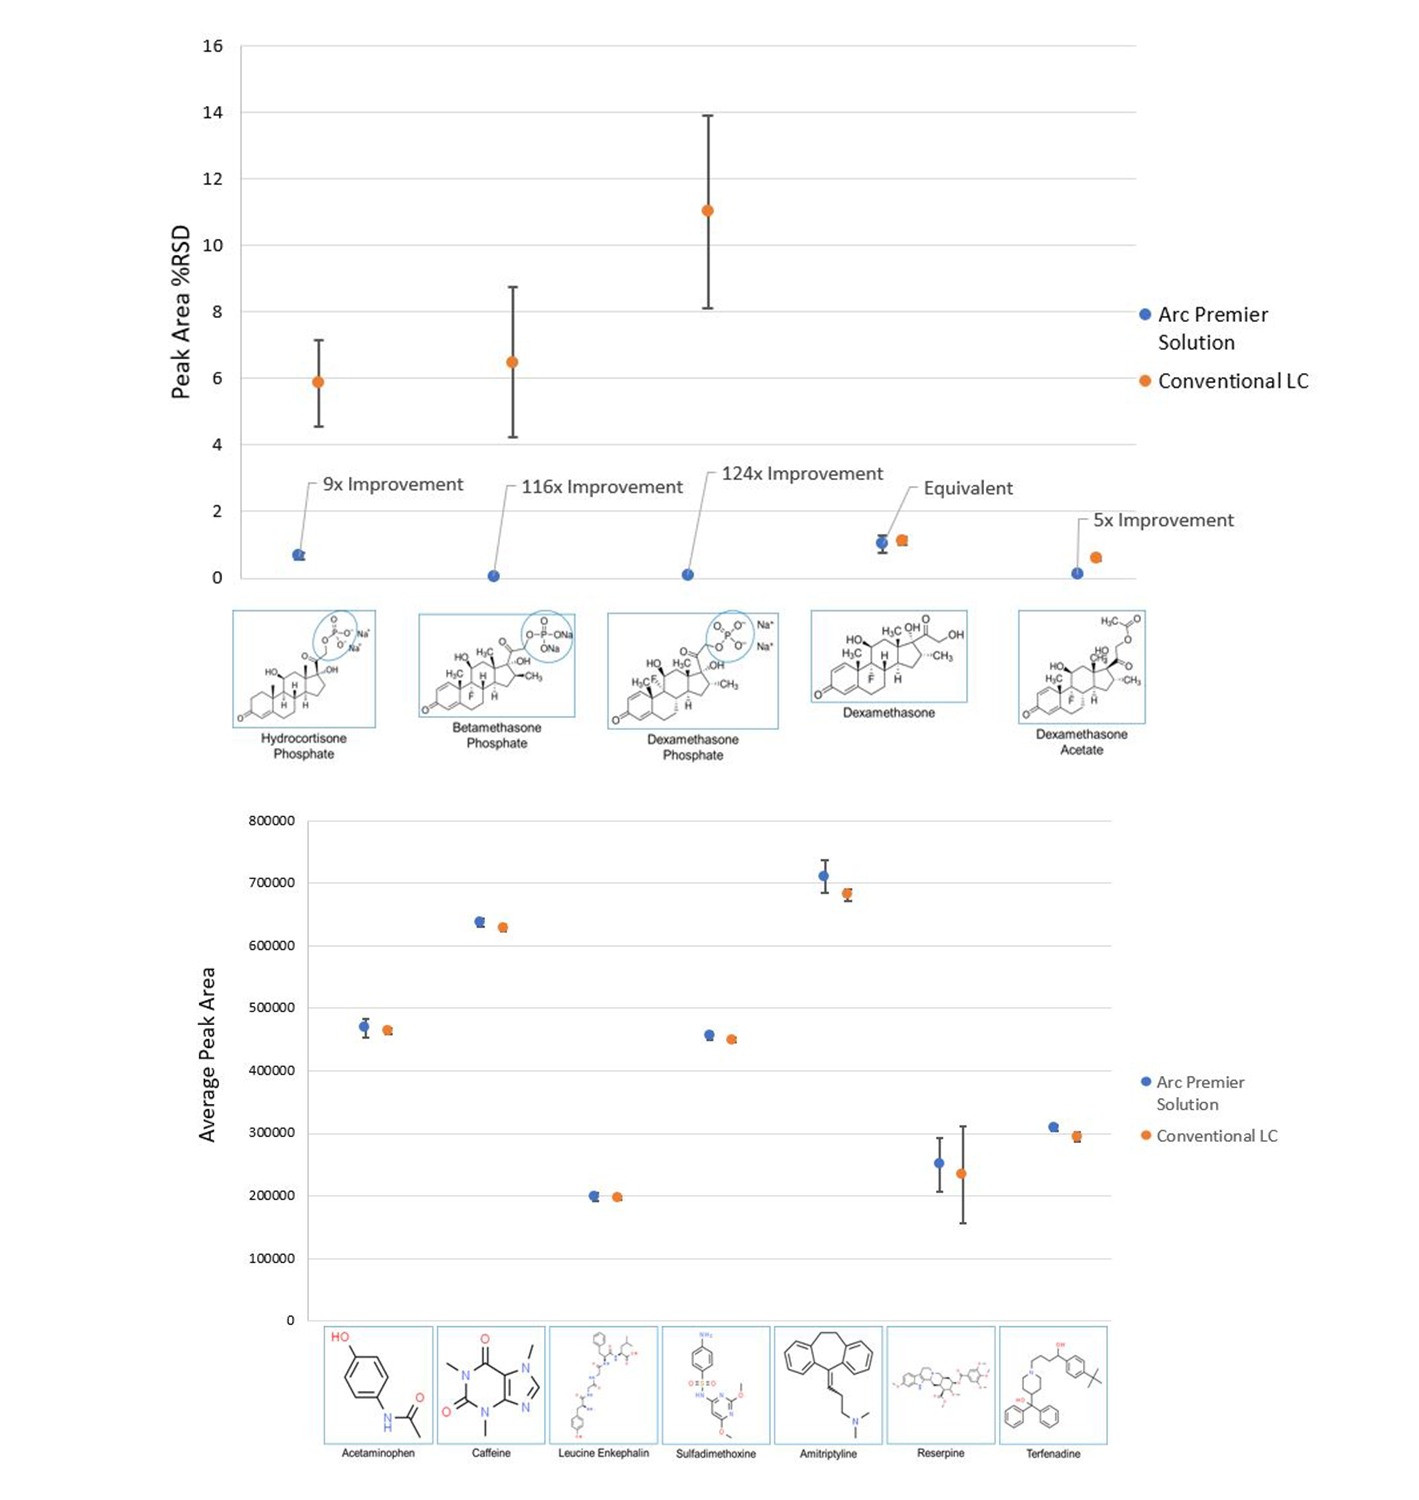 Analysis of data of hydrocortisone phosphate, betamethasone phosphate, dexamethasone phosphate, dexamethasone, and dexamethasone acetate from an Arc Premier System and a conventional LC system by six users. Peak area reproducibility improved 9-124x.